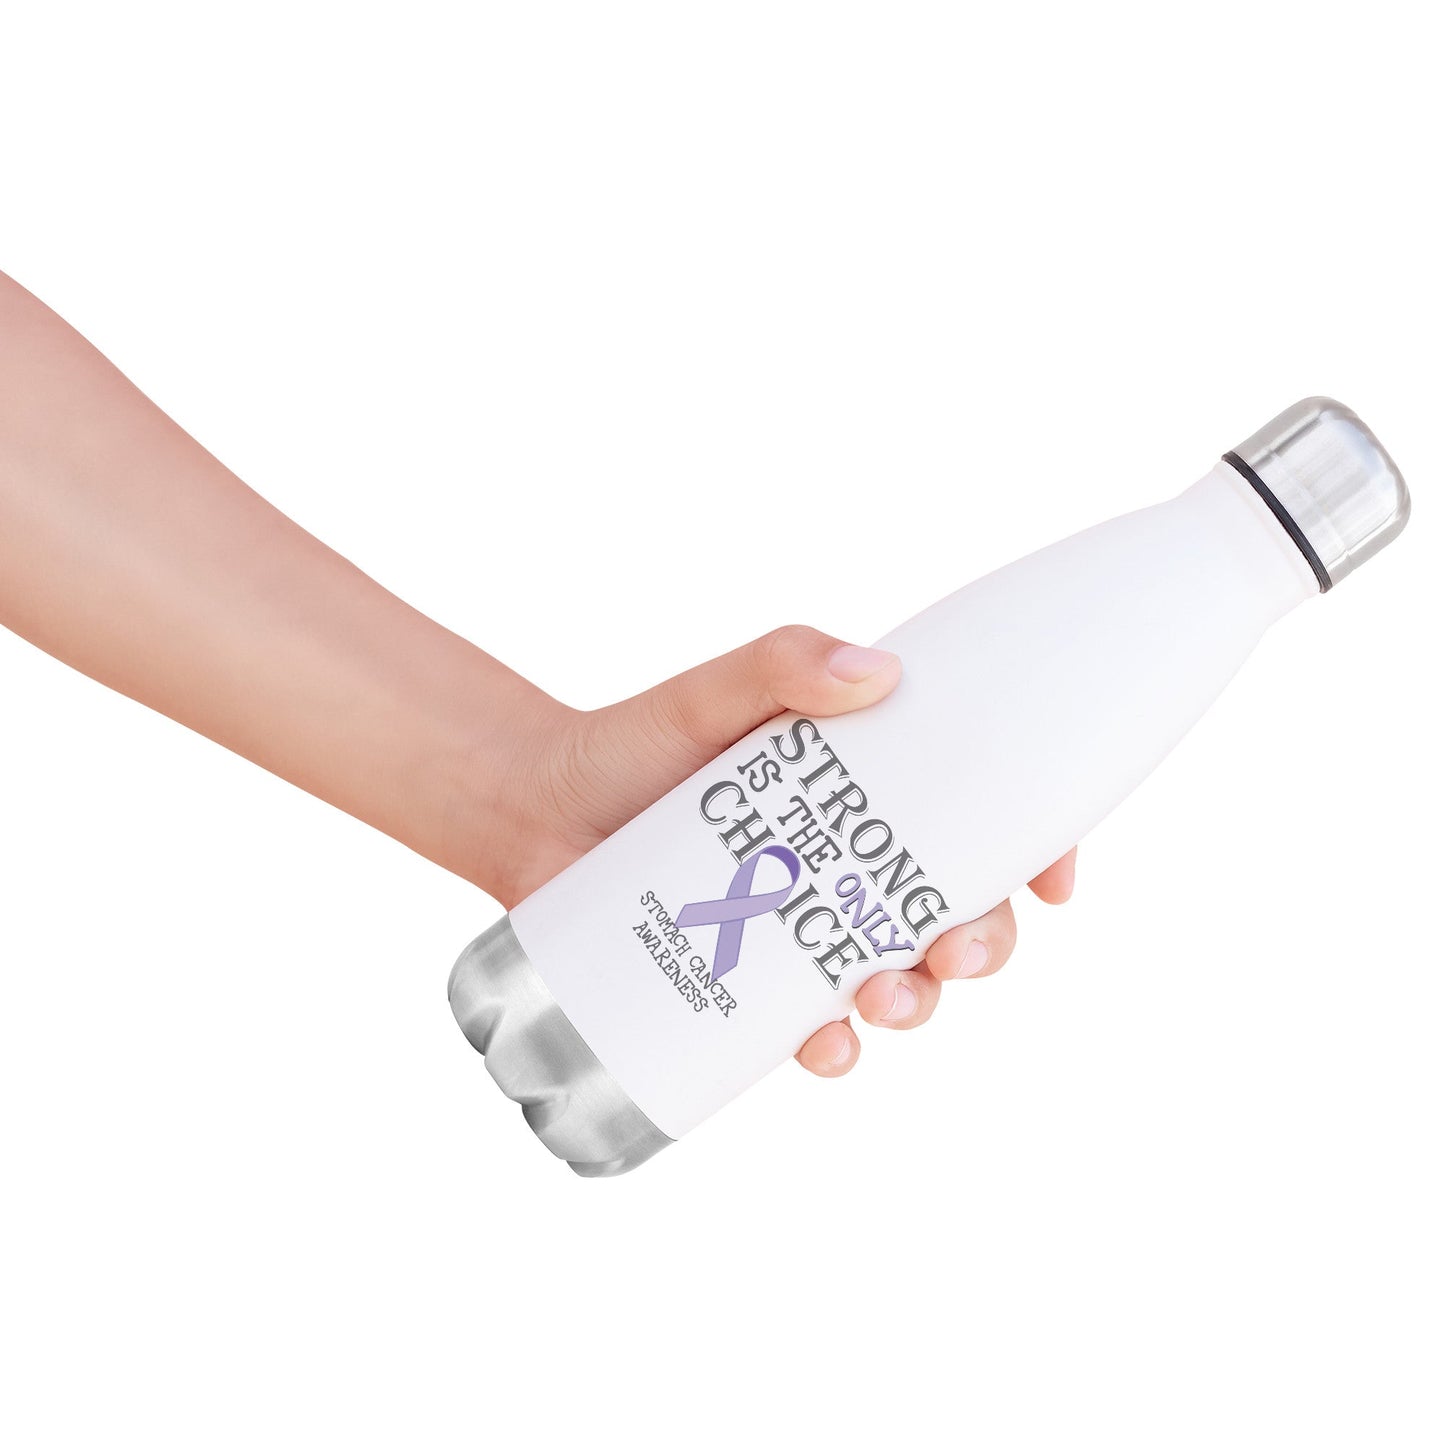 Strong is the Only Choice -Stomach Cancer Awareness 20oz Insulated Water Bottle |x|